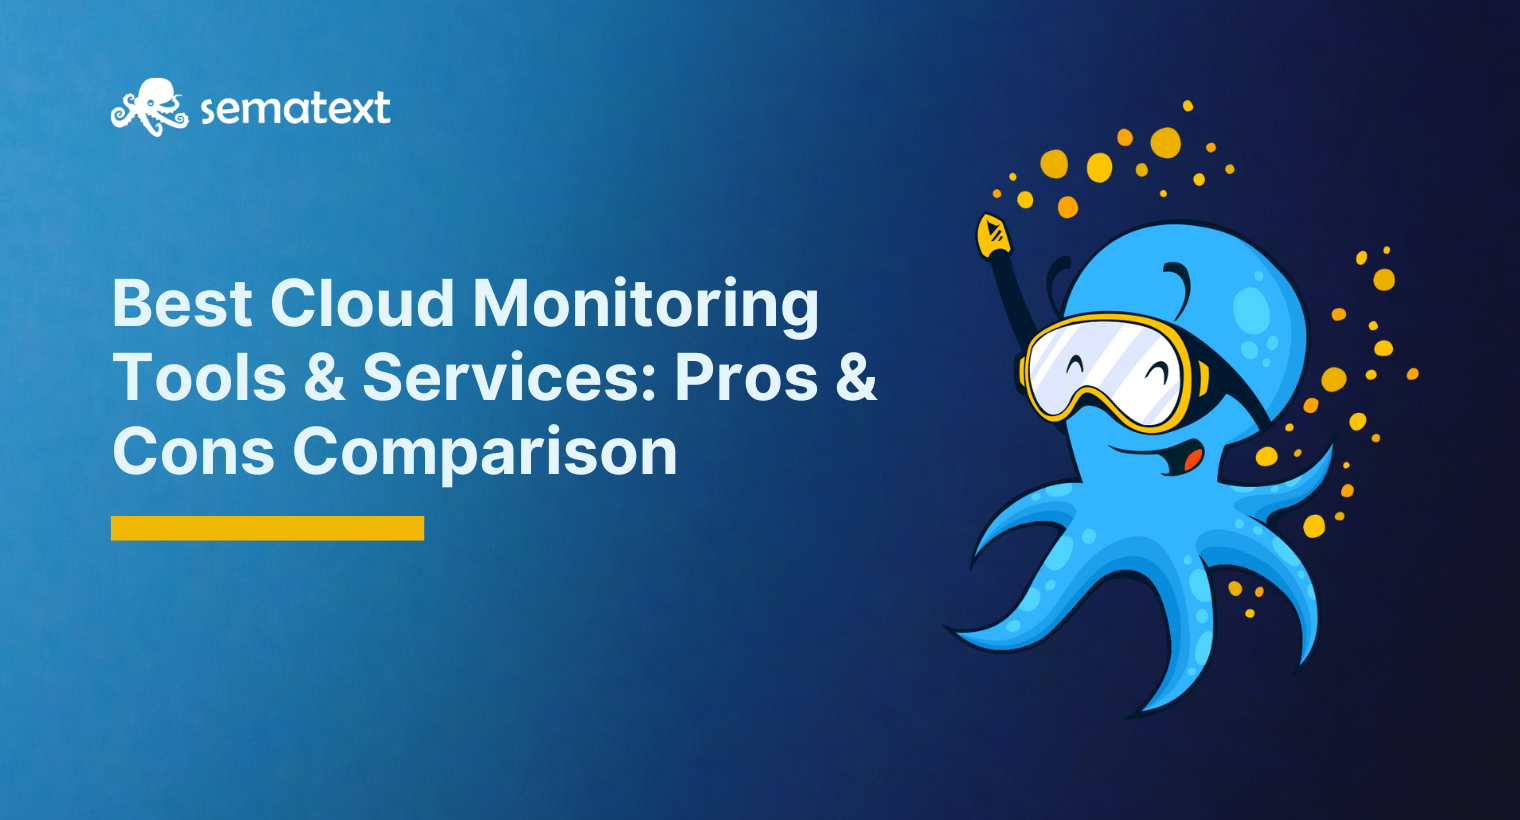 20 Best Cloud Monitoring Tools & Services in 2023: Pros & Cons Comparison